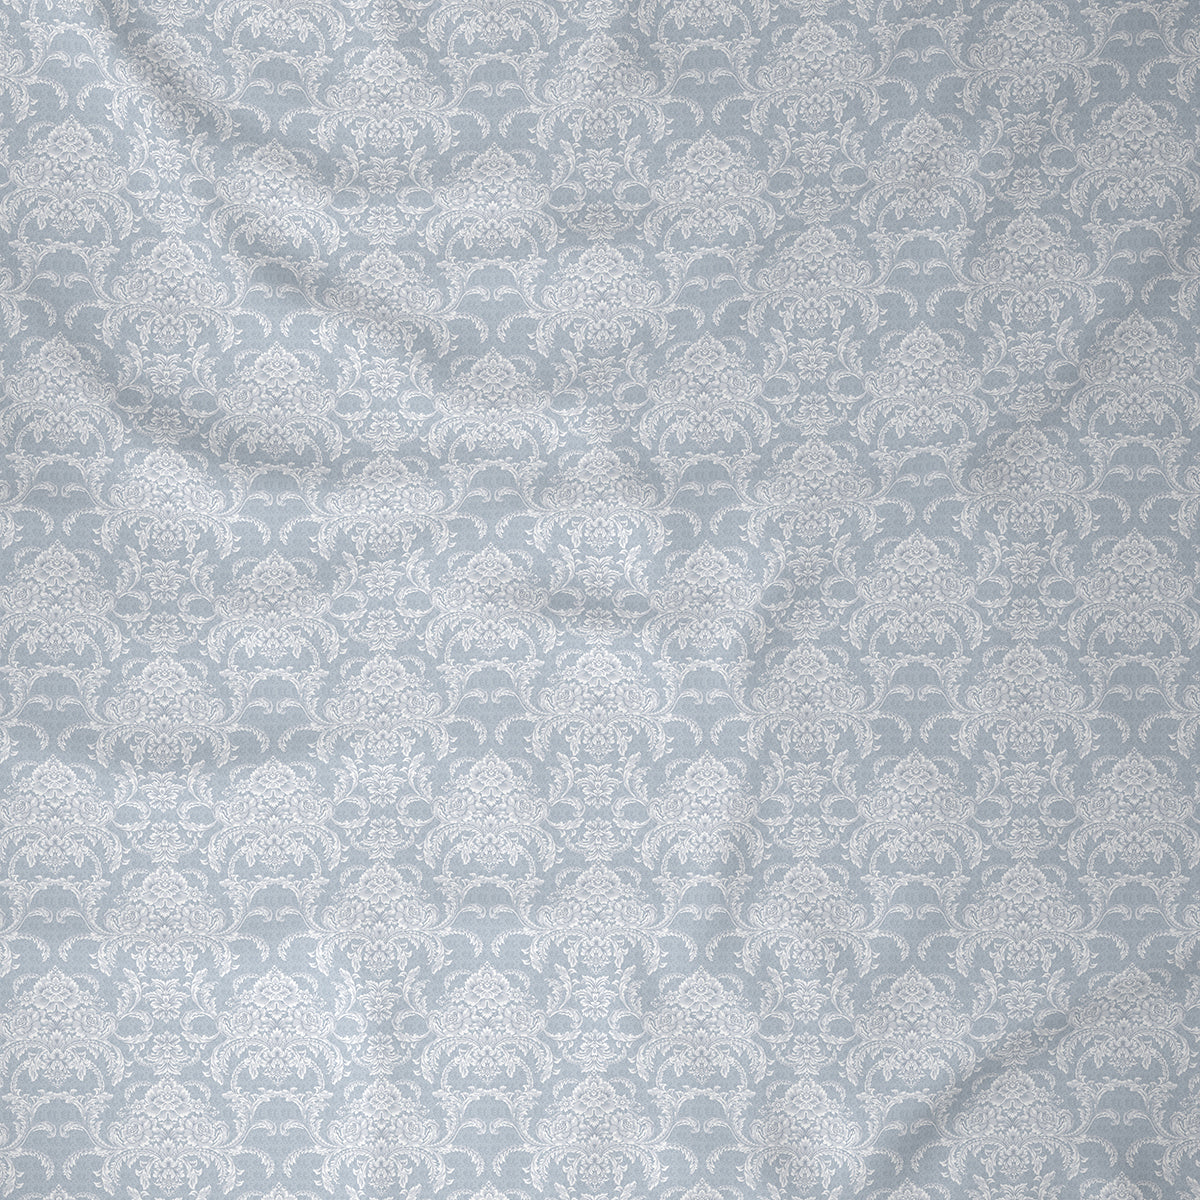 Hermosa Exotic Bouquet Damask Floral Grey Quilt